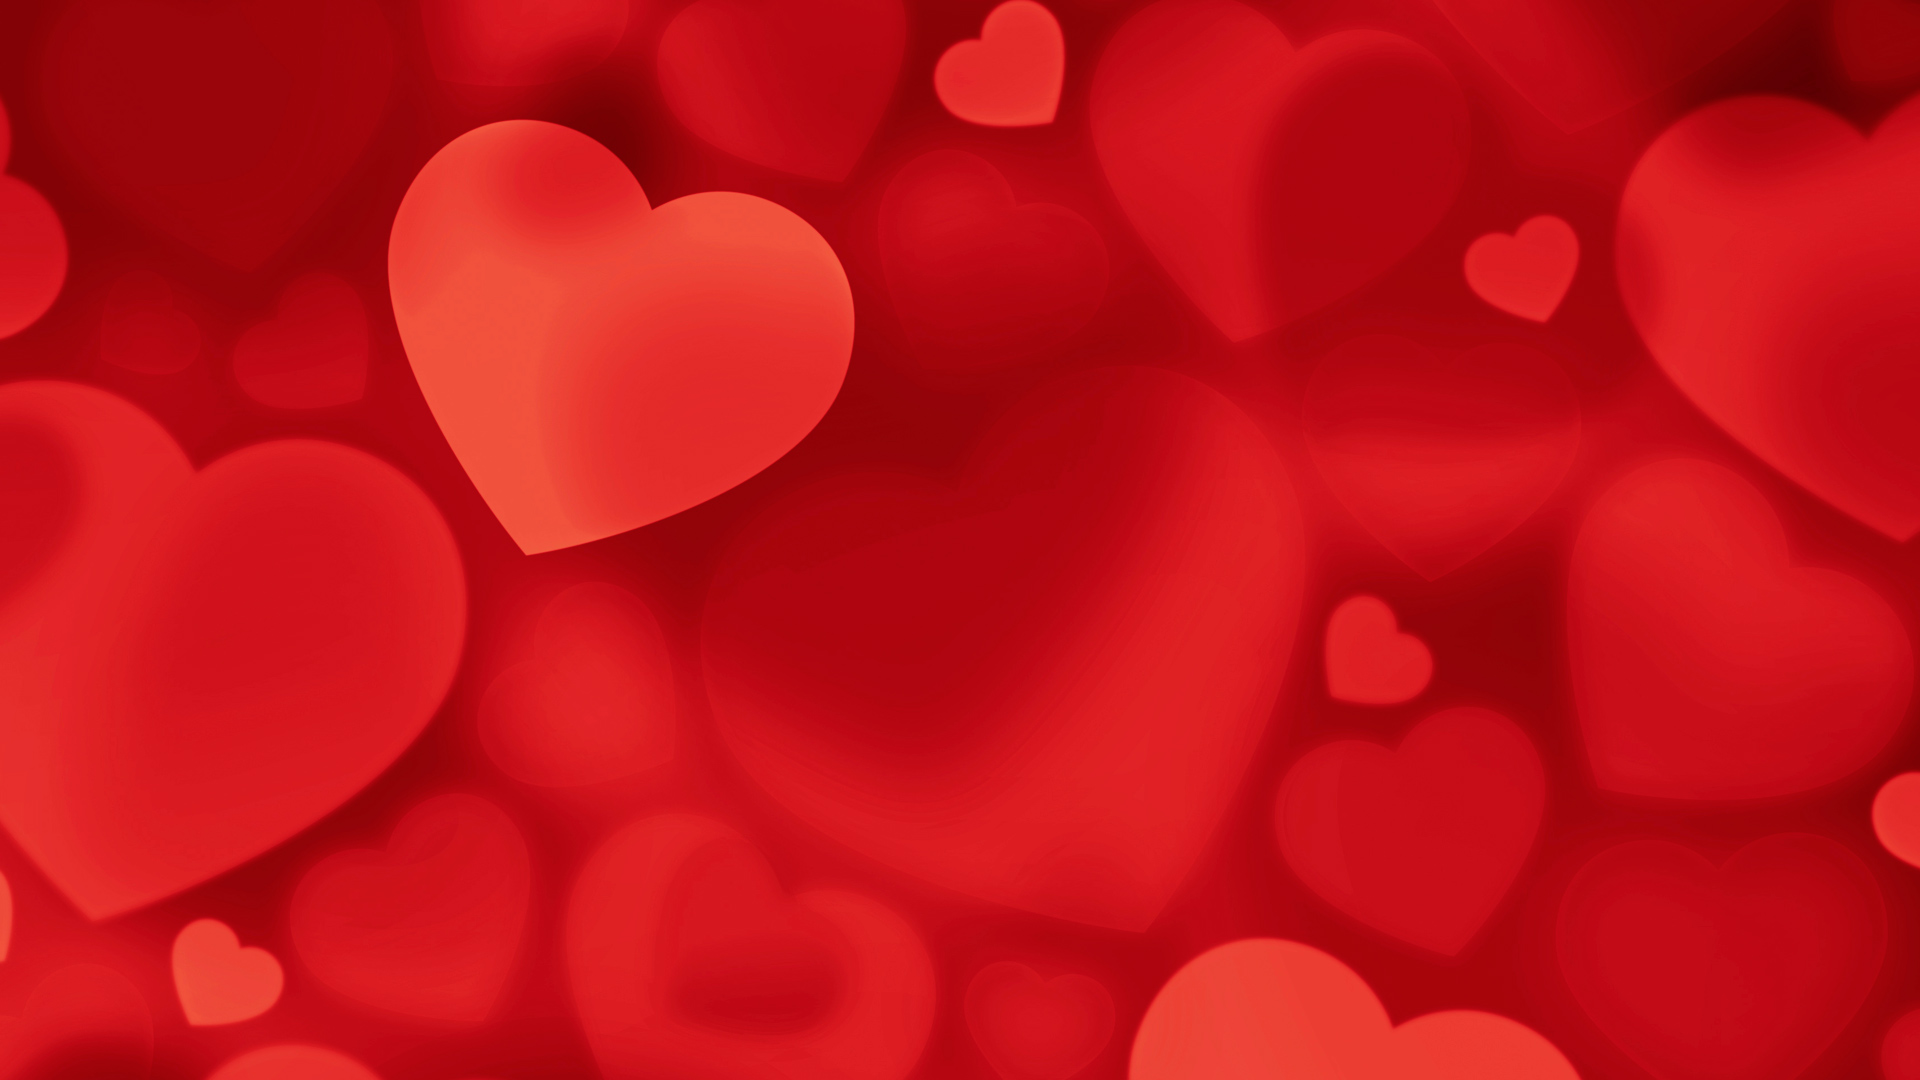 American Heart releases heart-healthy Valentine's Day tips